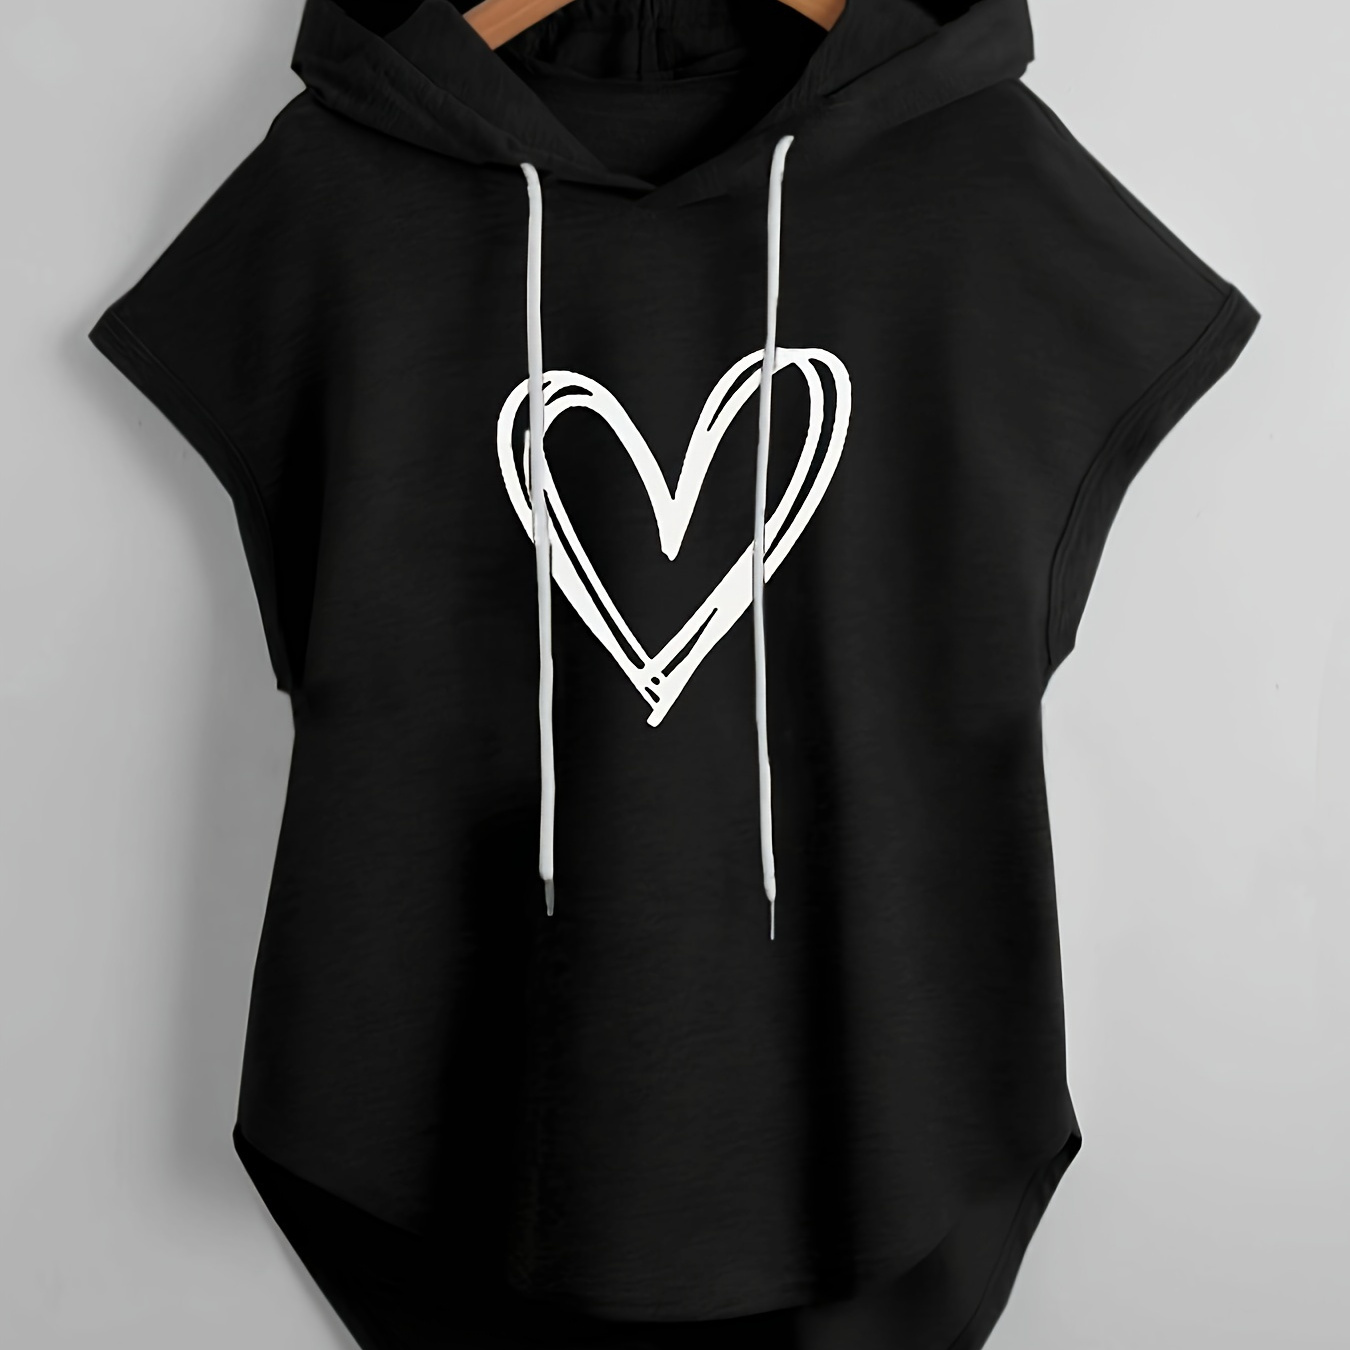 

Heart Print Hooded Drawstring T-shirt, Casual Short Sleeve Top For Spring & Summer, Women's Clothing